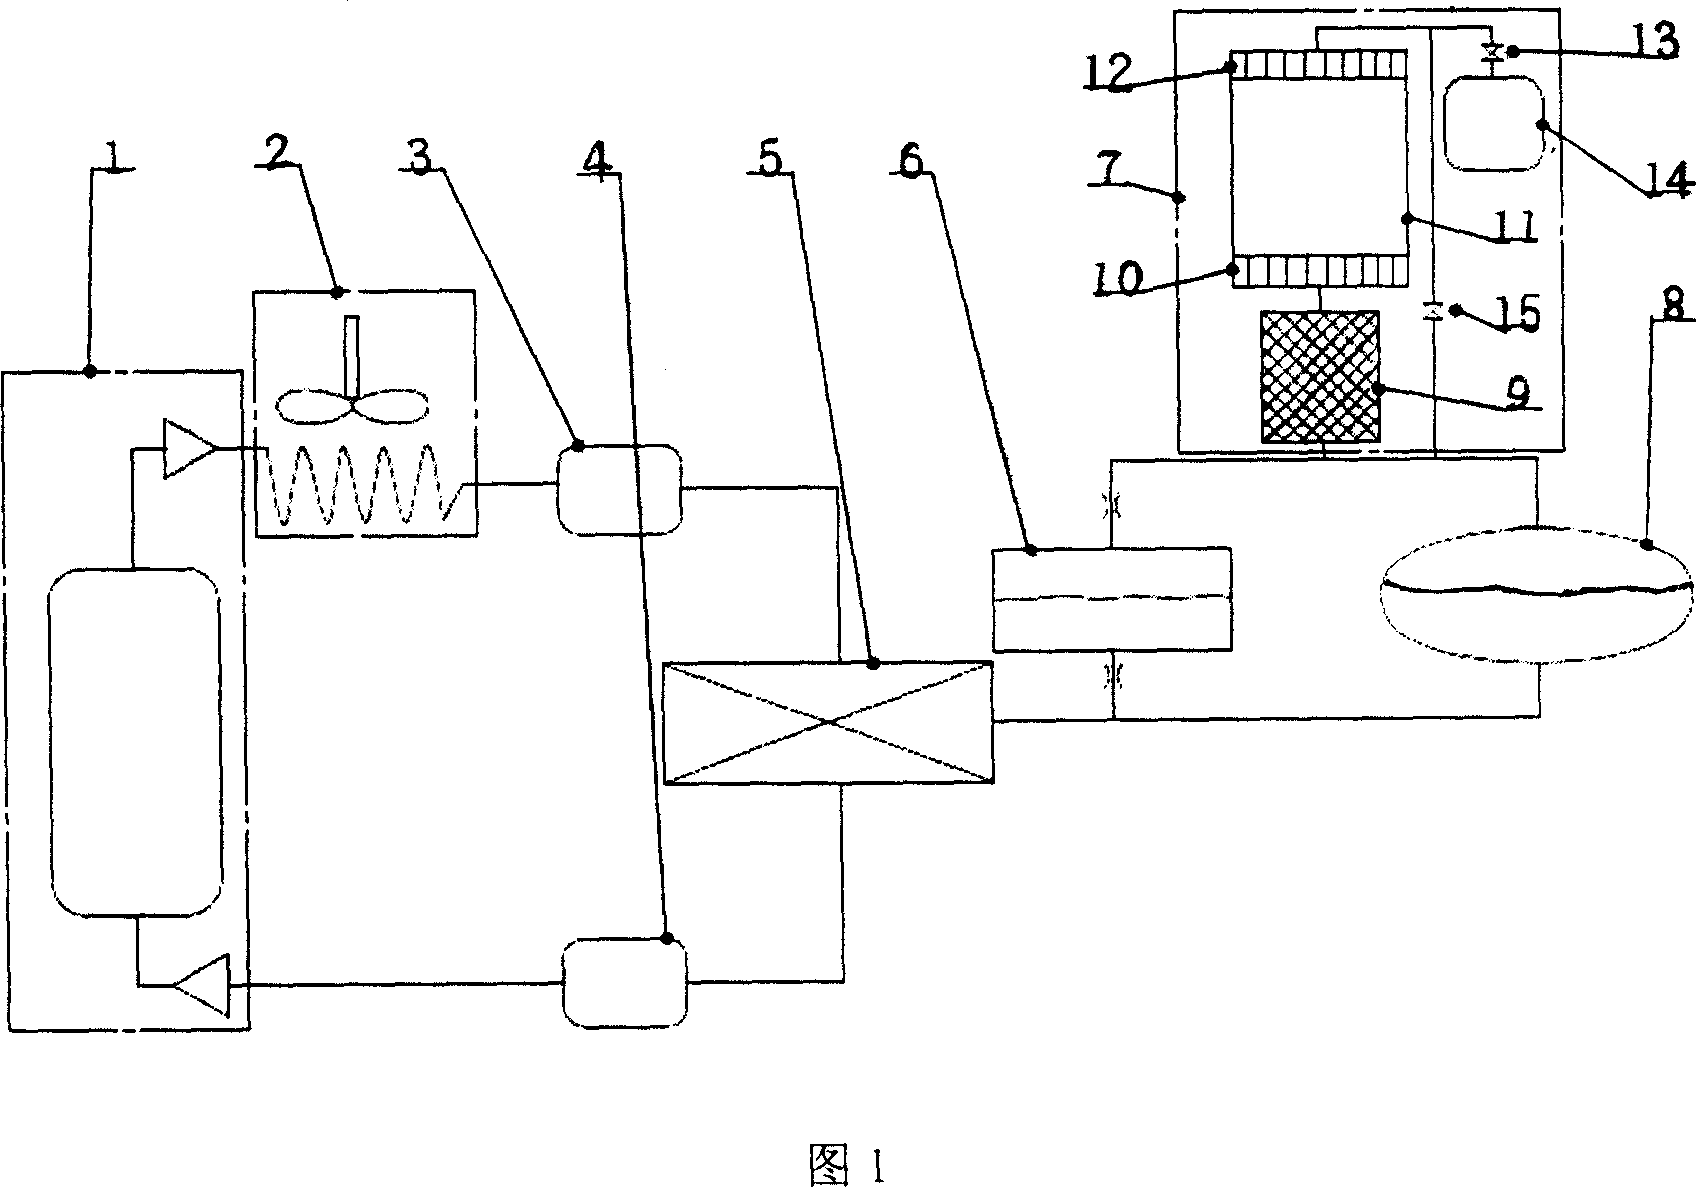 Oil lubrication compressor gas supplied circulating refrigerating device